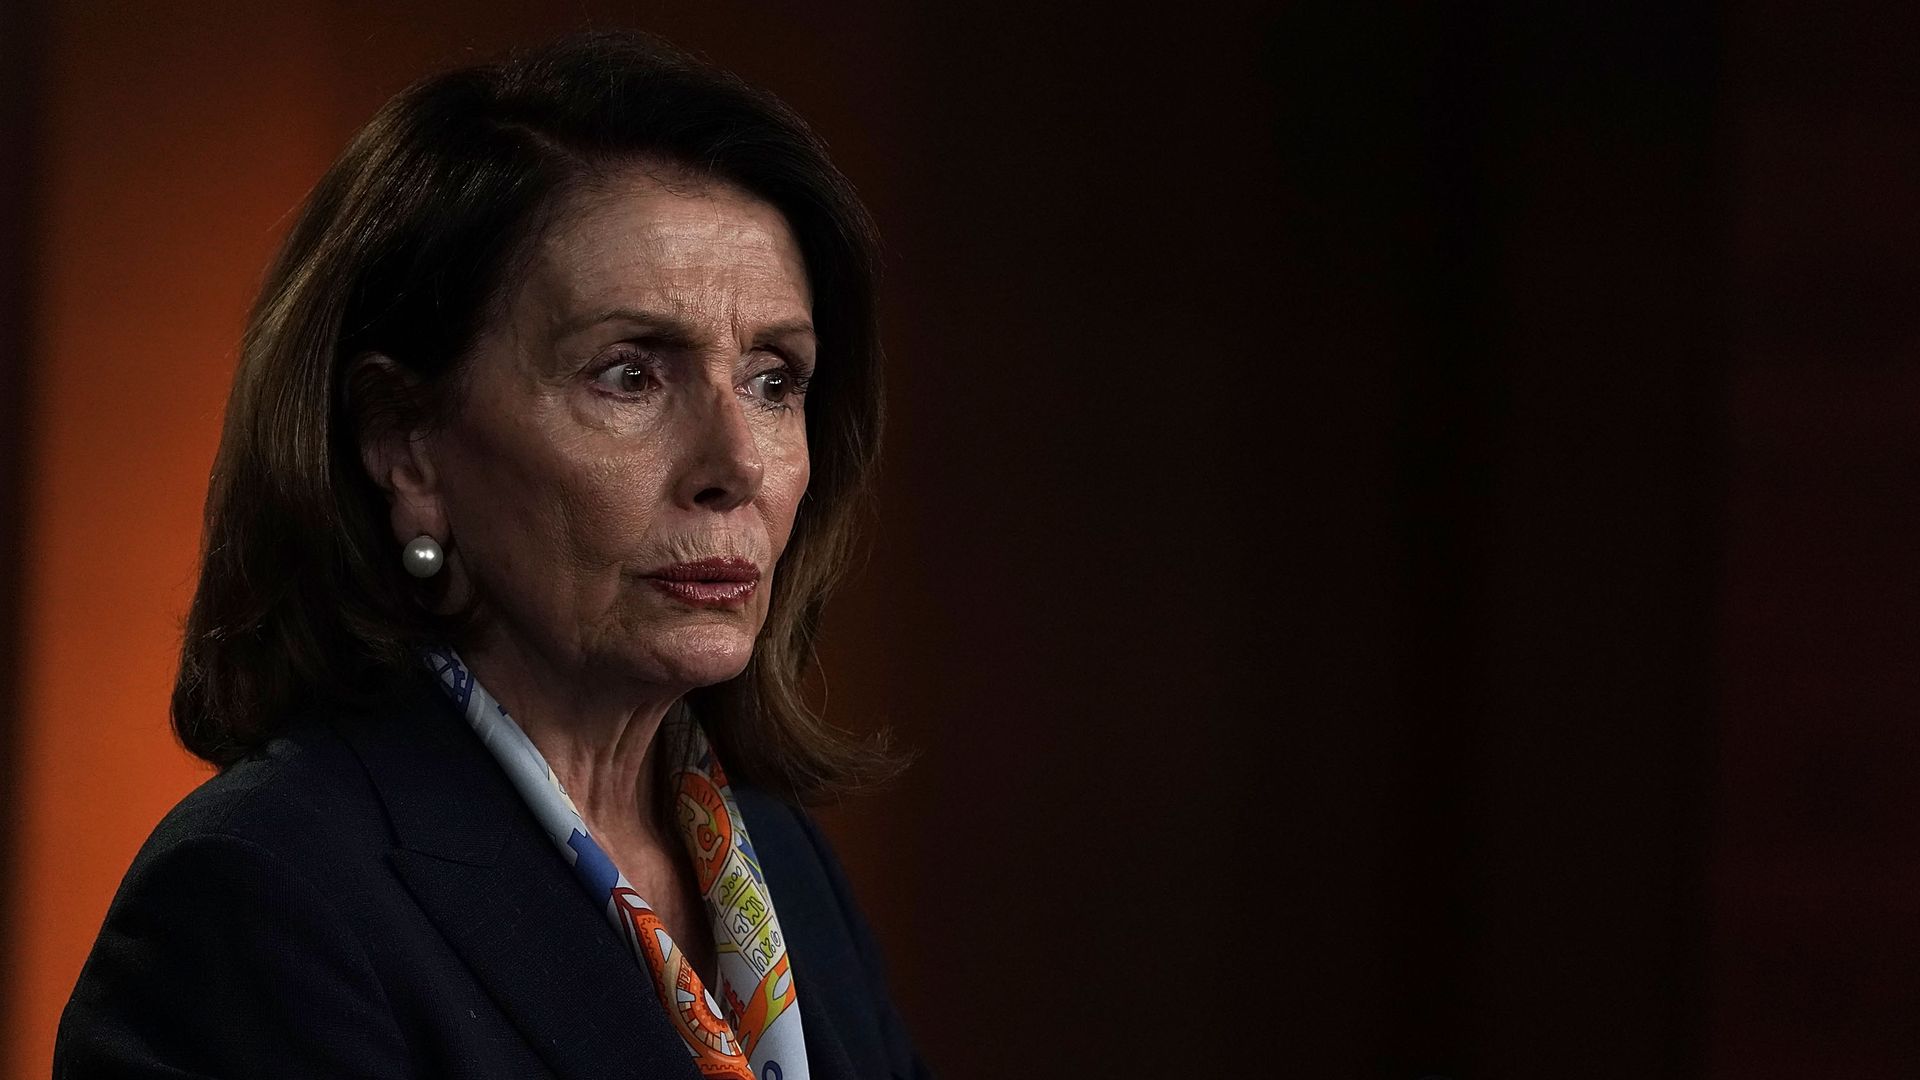 Nancy Pelosi in a dark suit with a colorful scarf before a black and orange backdrop.